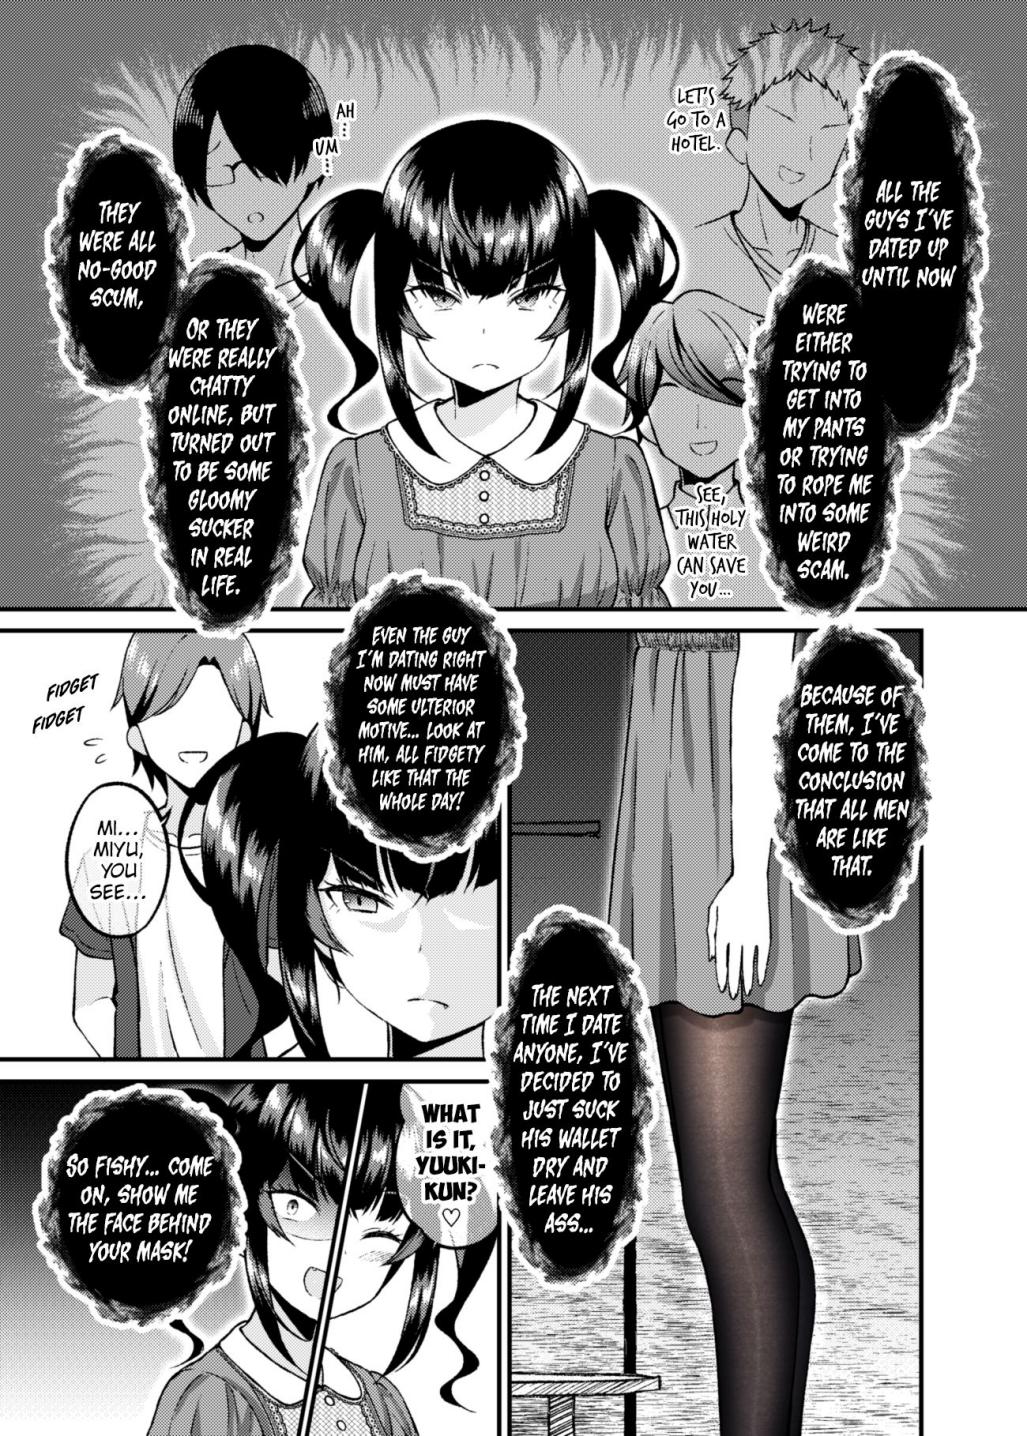 A Dangerous Type Became My Girlfriend - Page 1